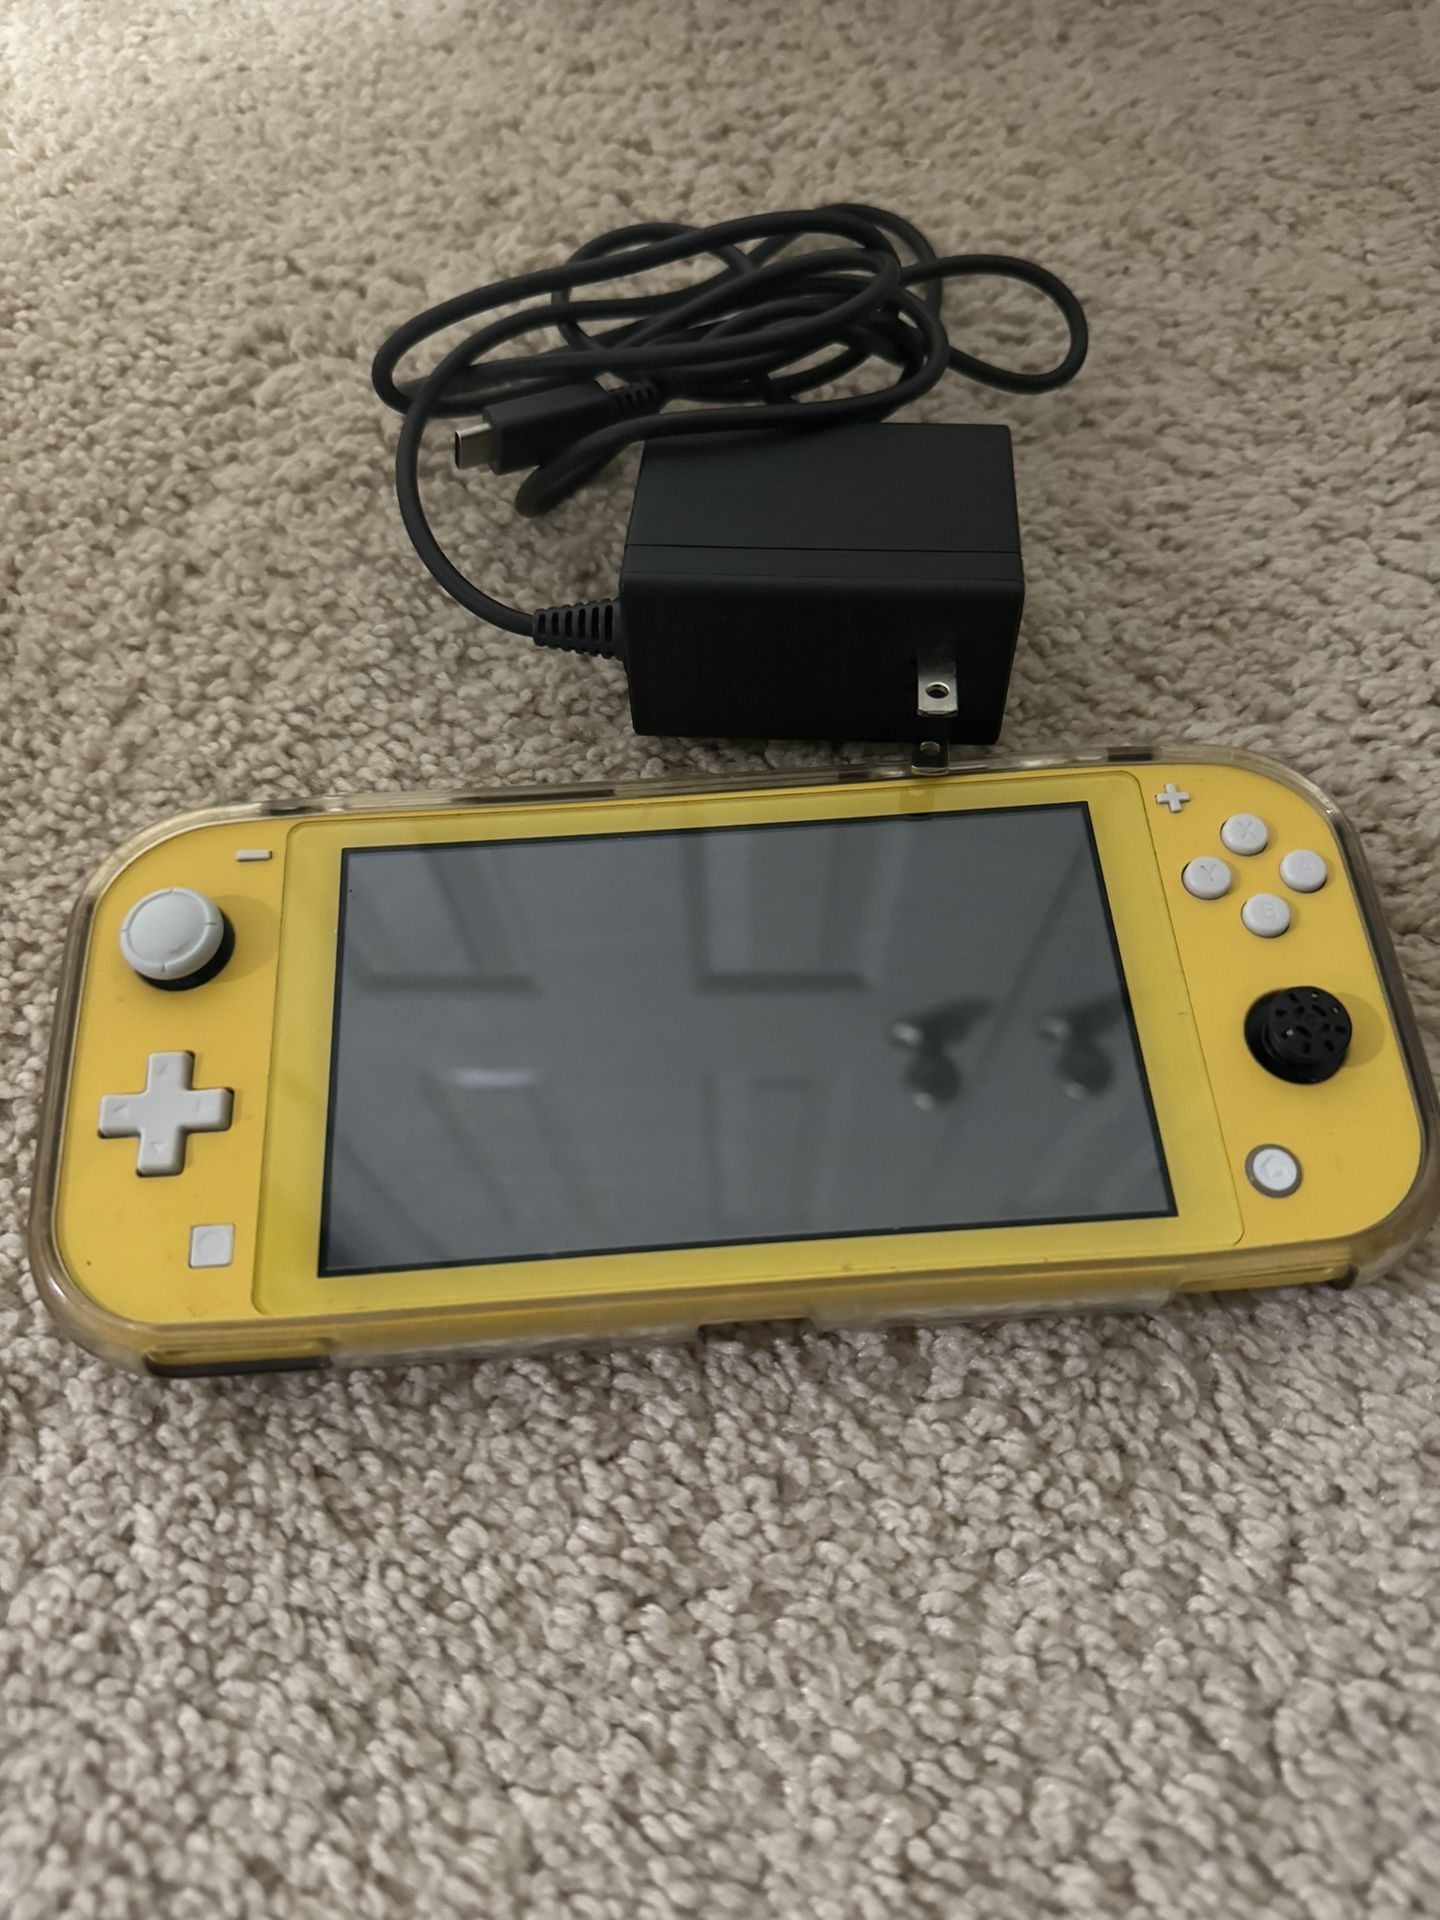 Nintendo Switch Lite w/ Protective Case And OEM Factory Charger